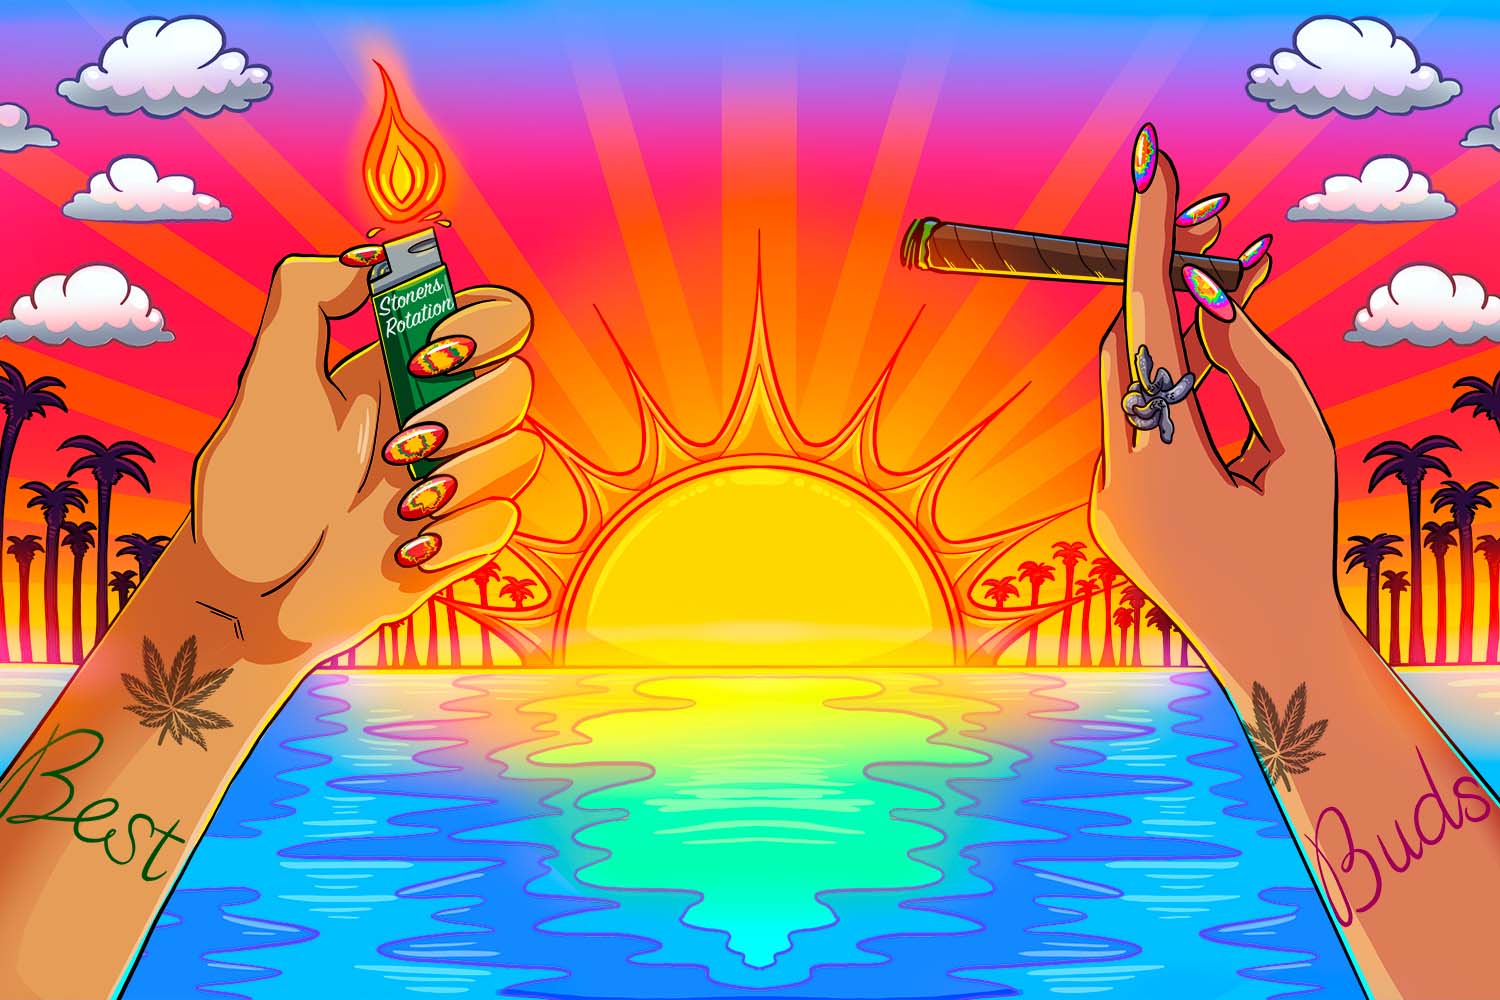 420 art of best friends lighting a blunt with matching stoner tattoos in front of sunset